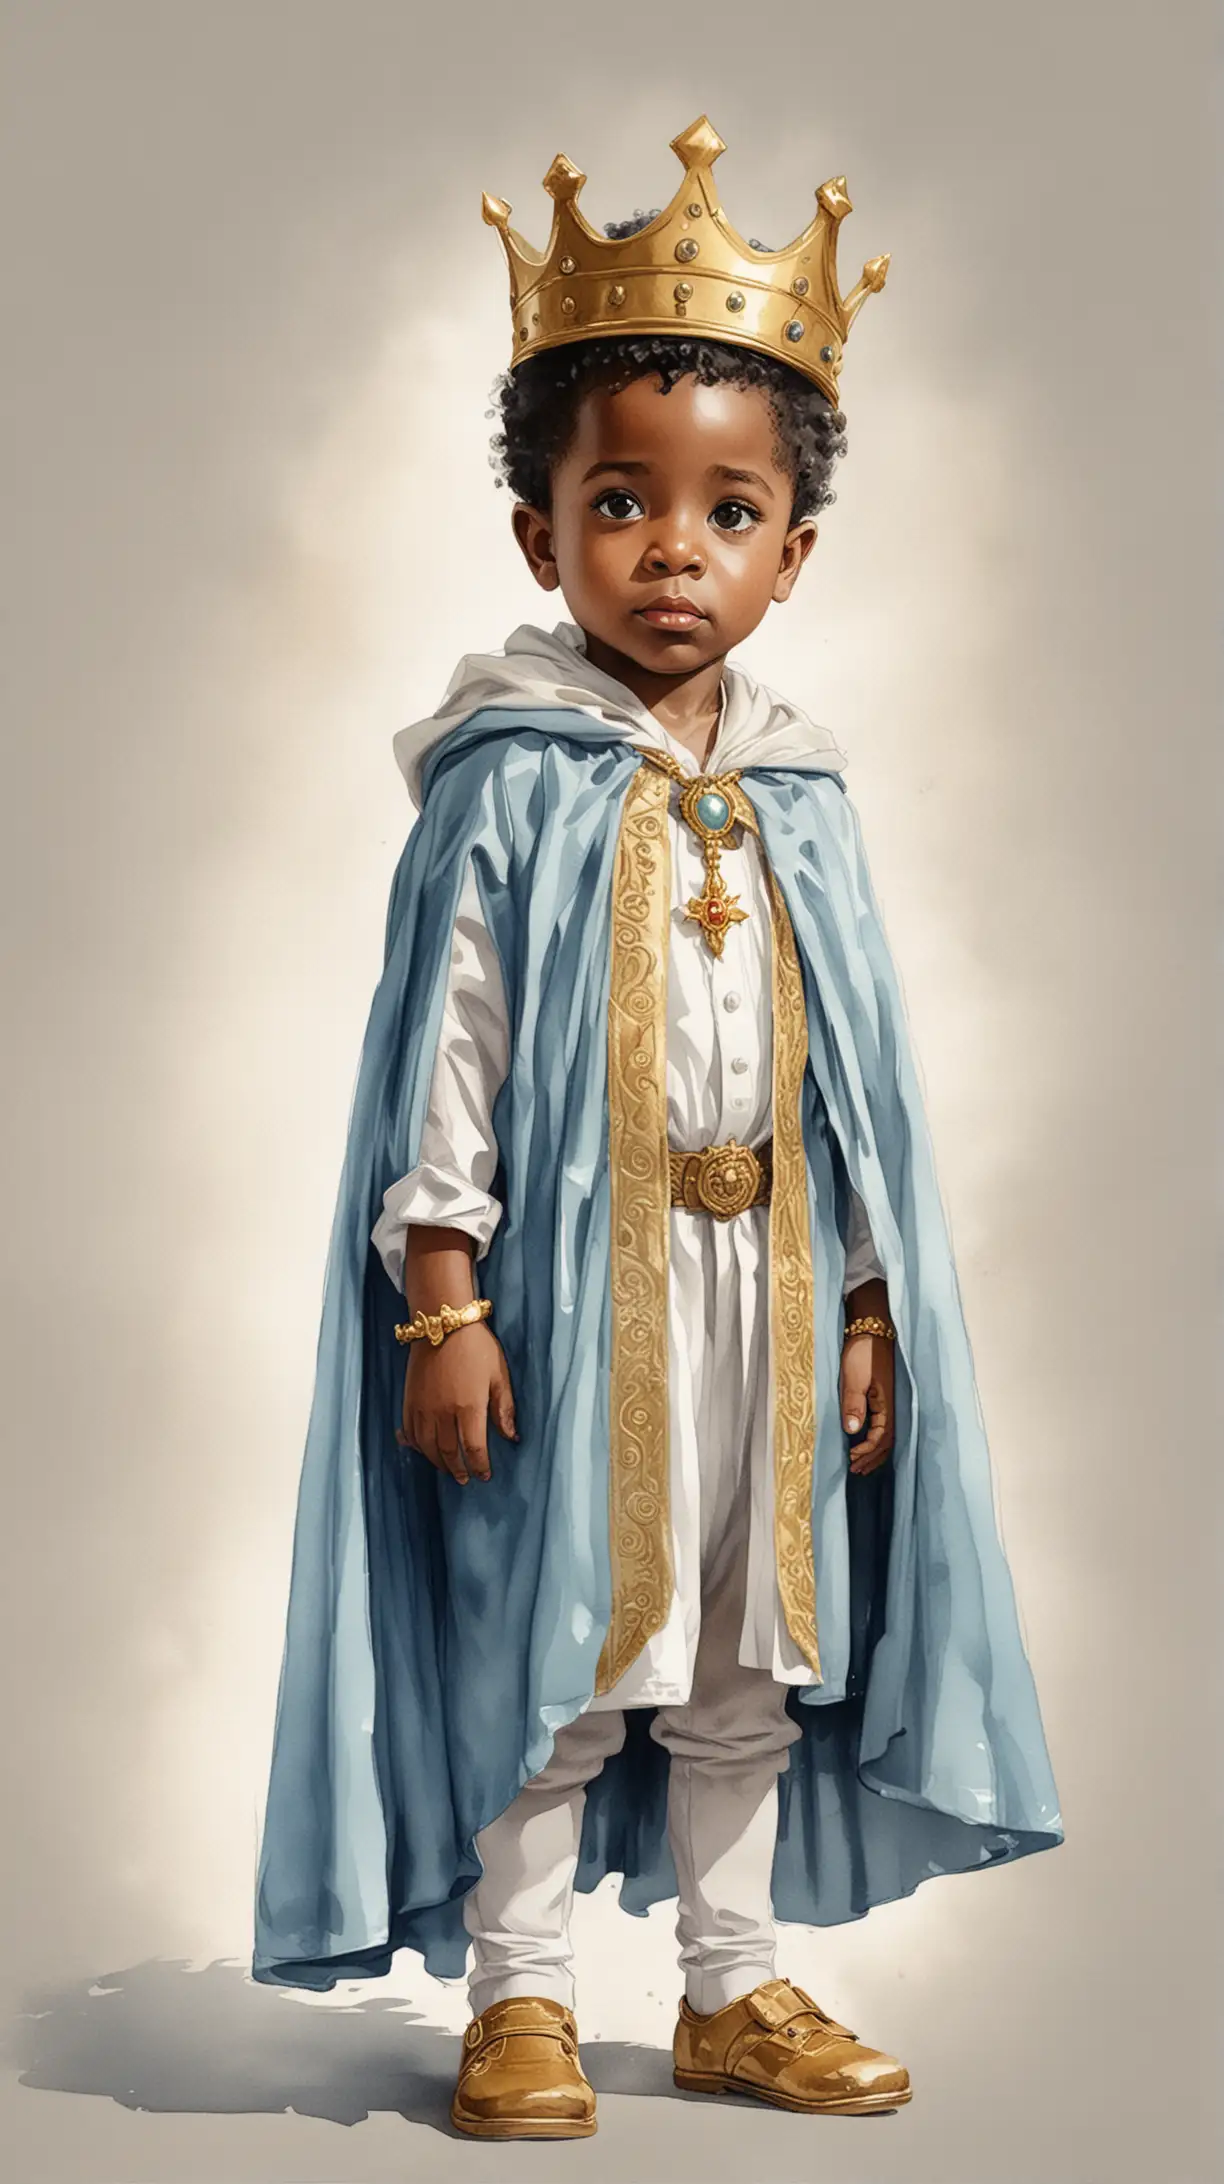 Little Black Boy Dressed as King in Watercolor Comic Style Illustration